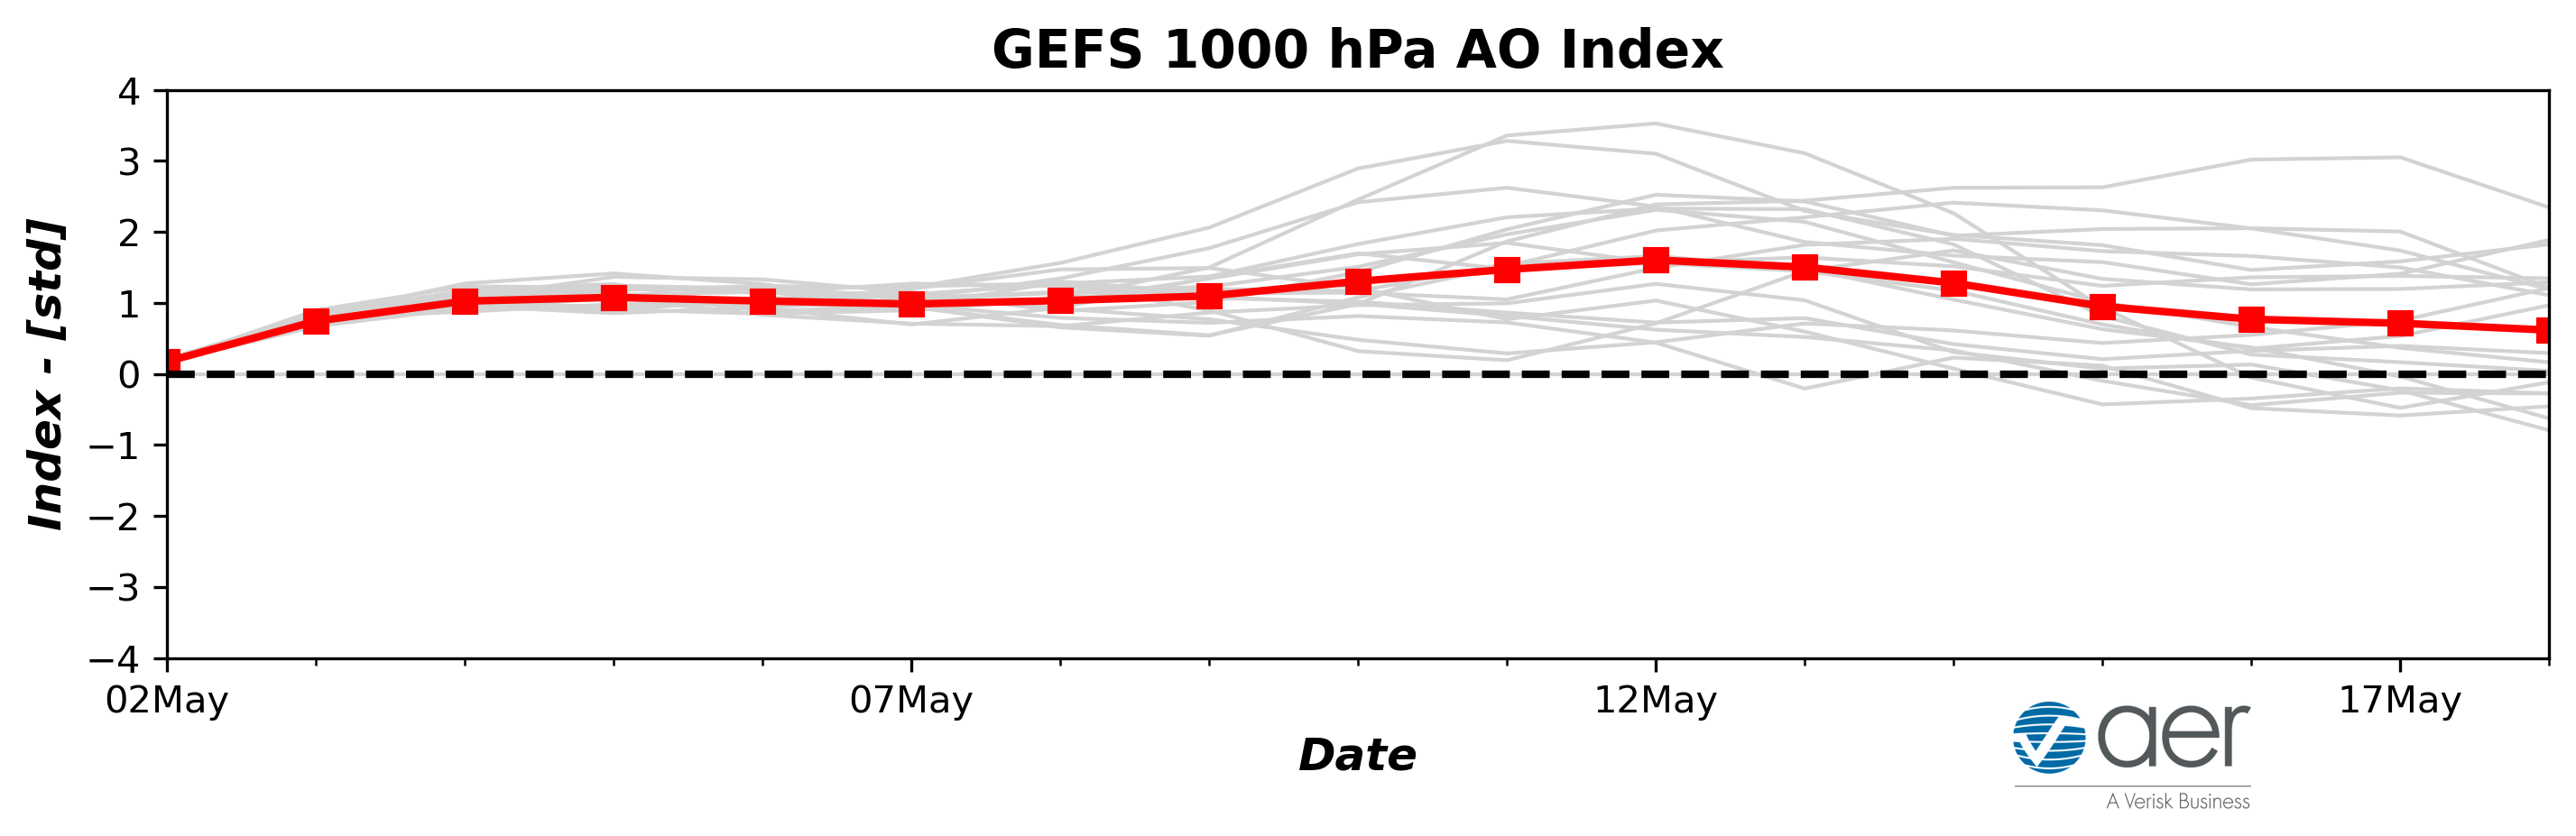 GEFS_AOIndex_1000hPa_2022050200.png